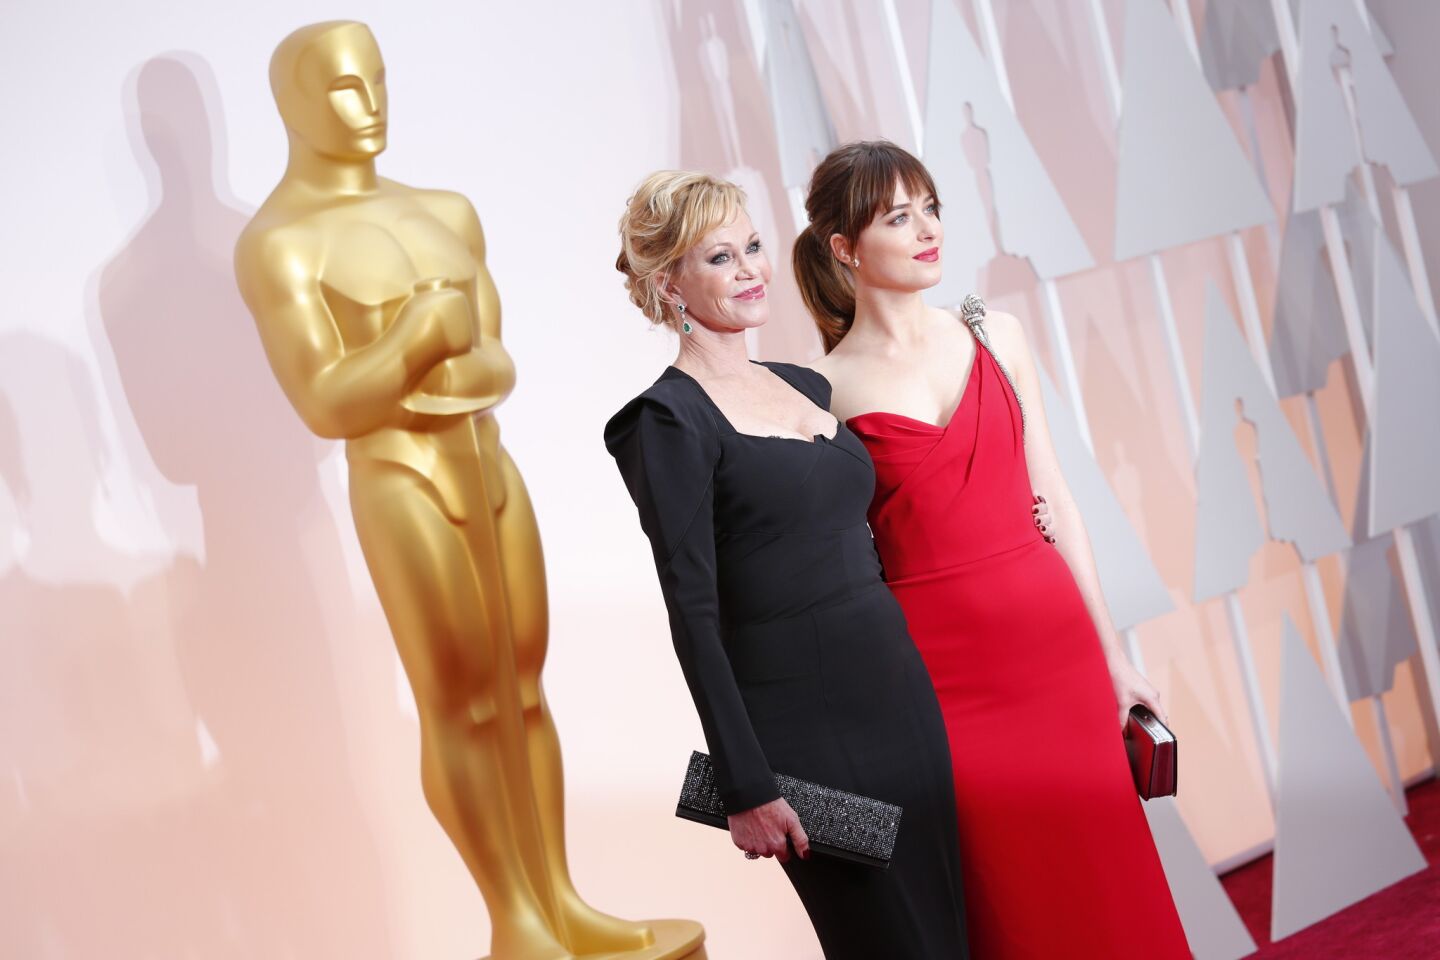 During a red carpet interview actress Melanie Griffith admitted she had not yet seen daughter Dakota Johnson's performance in "Fifty Shades of Grey," implying she was uncomfortable with some of the scenes she would see. When Griffith continued to refuse even the possibility of watching the film, a flustered Johnson responded "All right! You don't have to see it!"